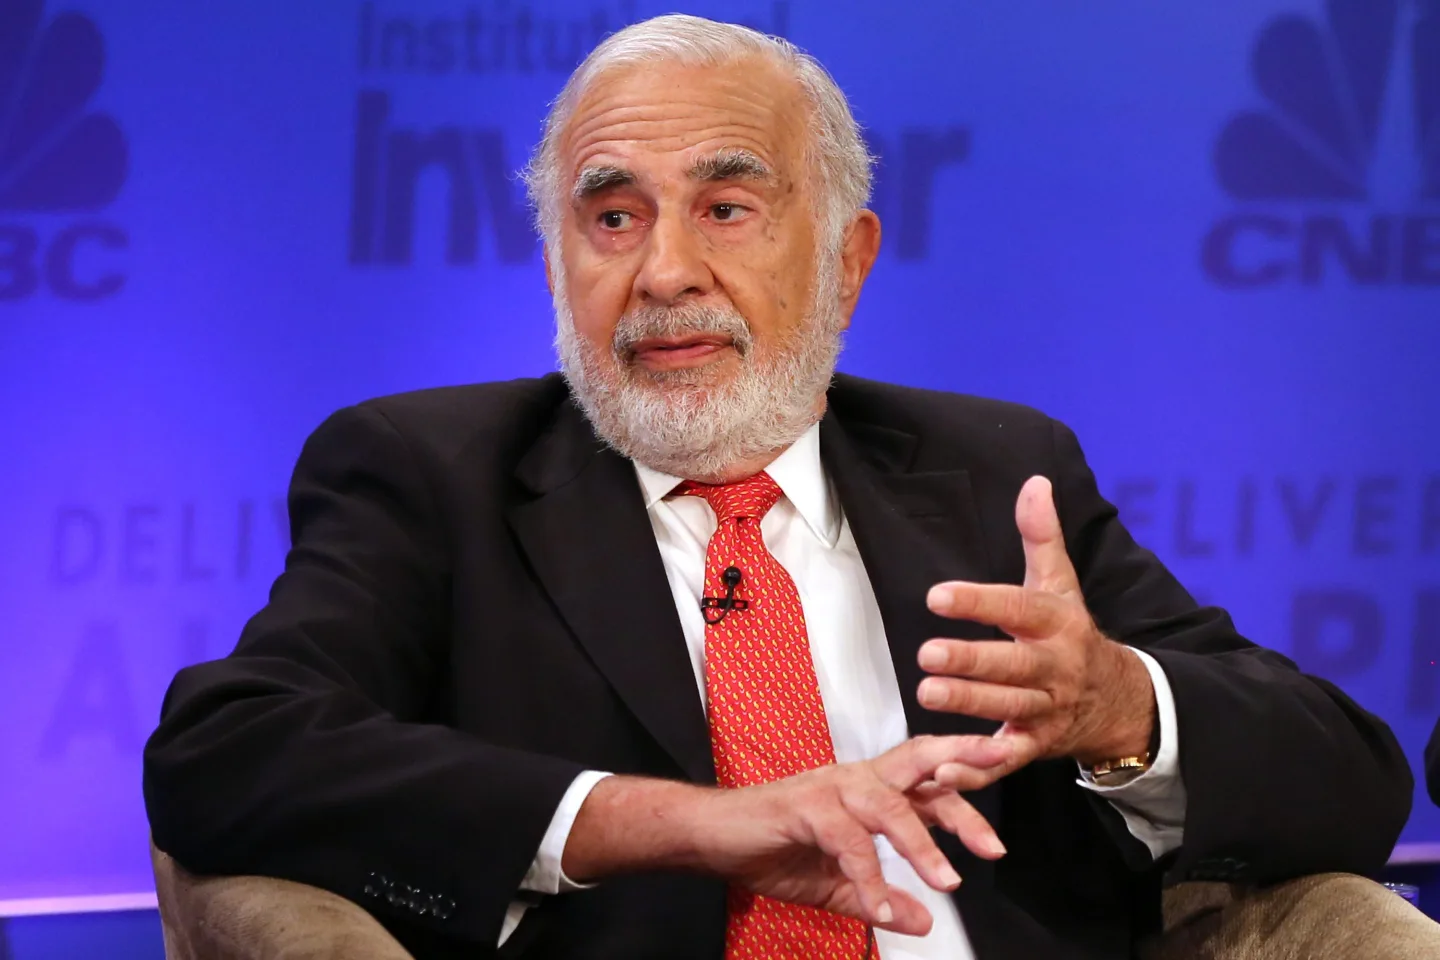 What we can learn from Carl Icahn's investing experience? Photo by Getty Images
source https://fortune.com/2022/09/22/top-investor-carl-icahn-warns-inflation-recession-worst-yet-to-come-stock-market-roman-empire/